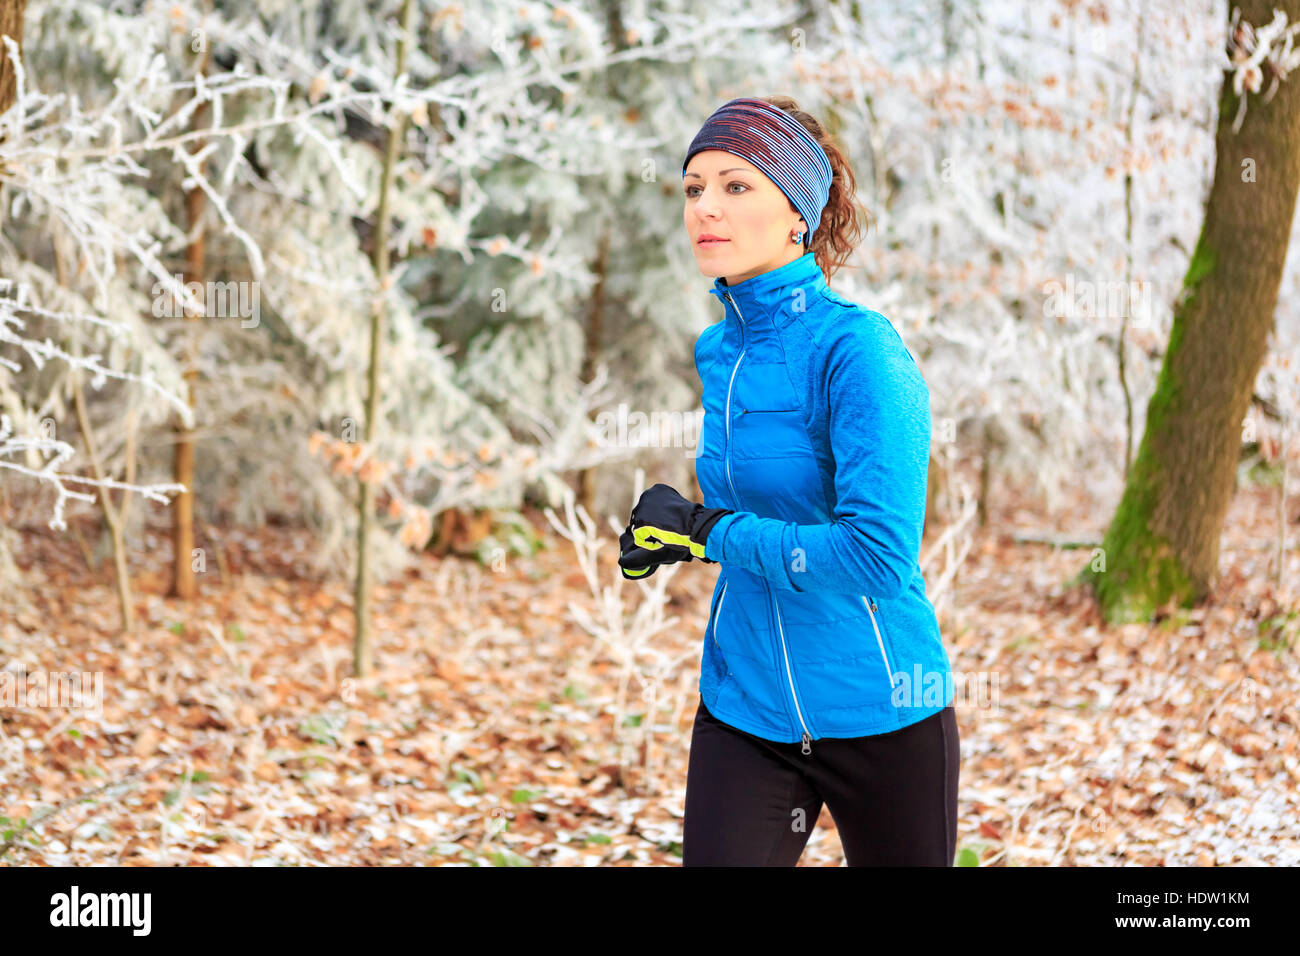 a young woman jogging in the wintry forest Stock Photo